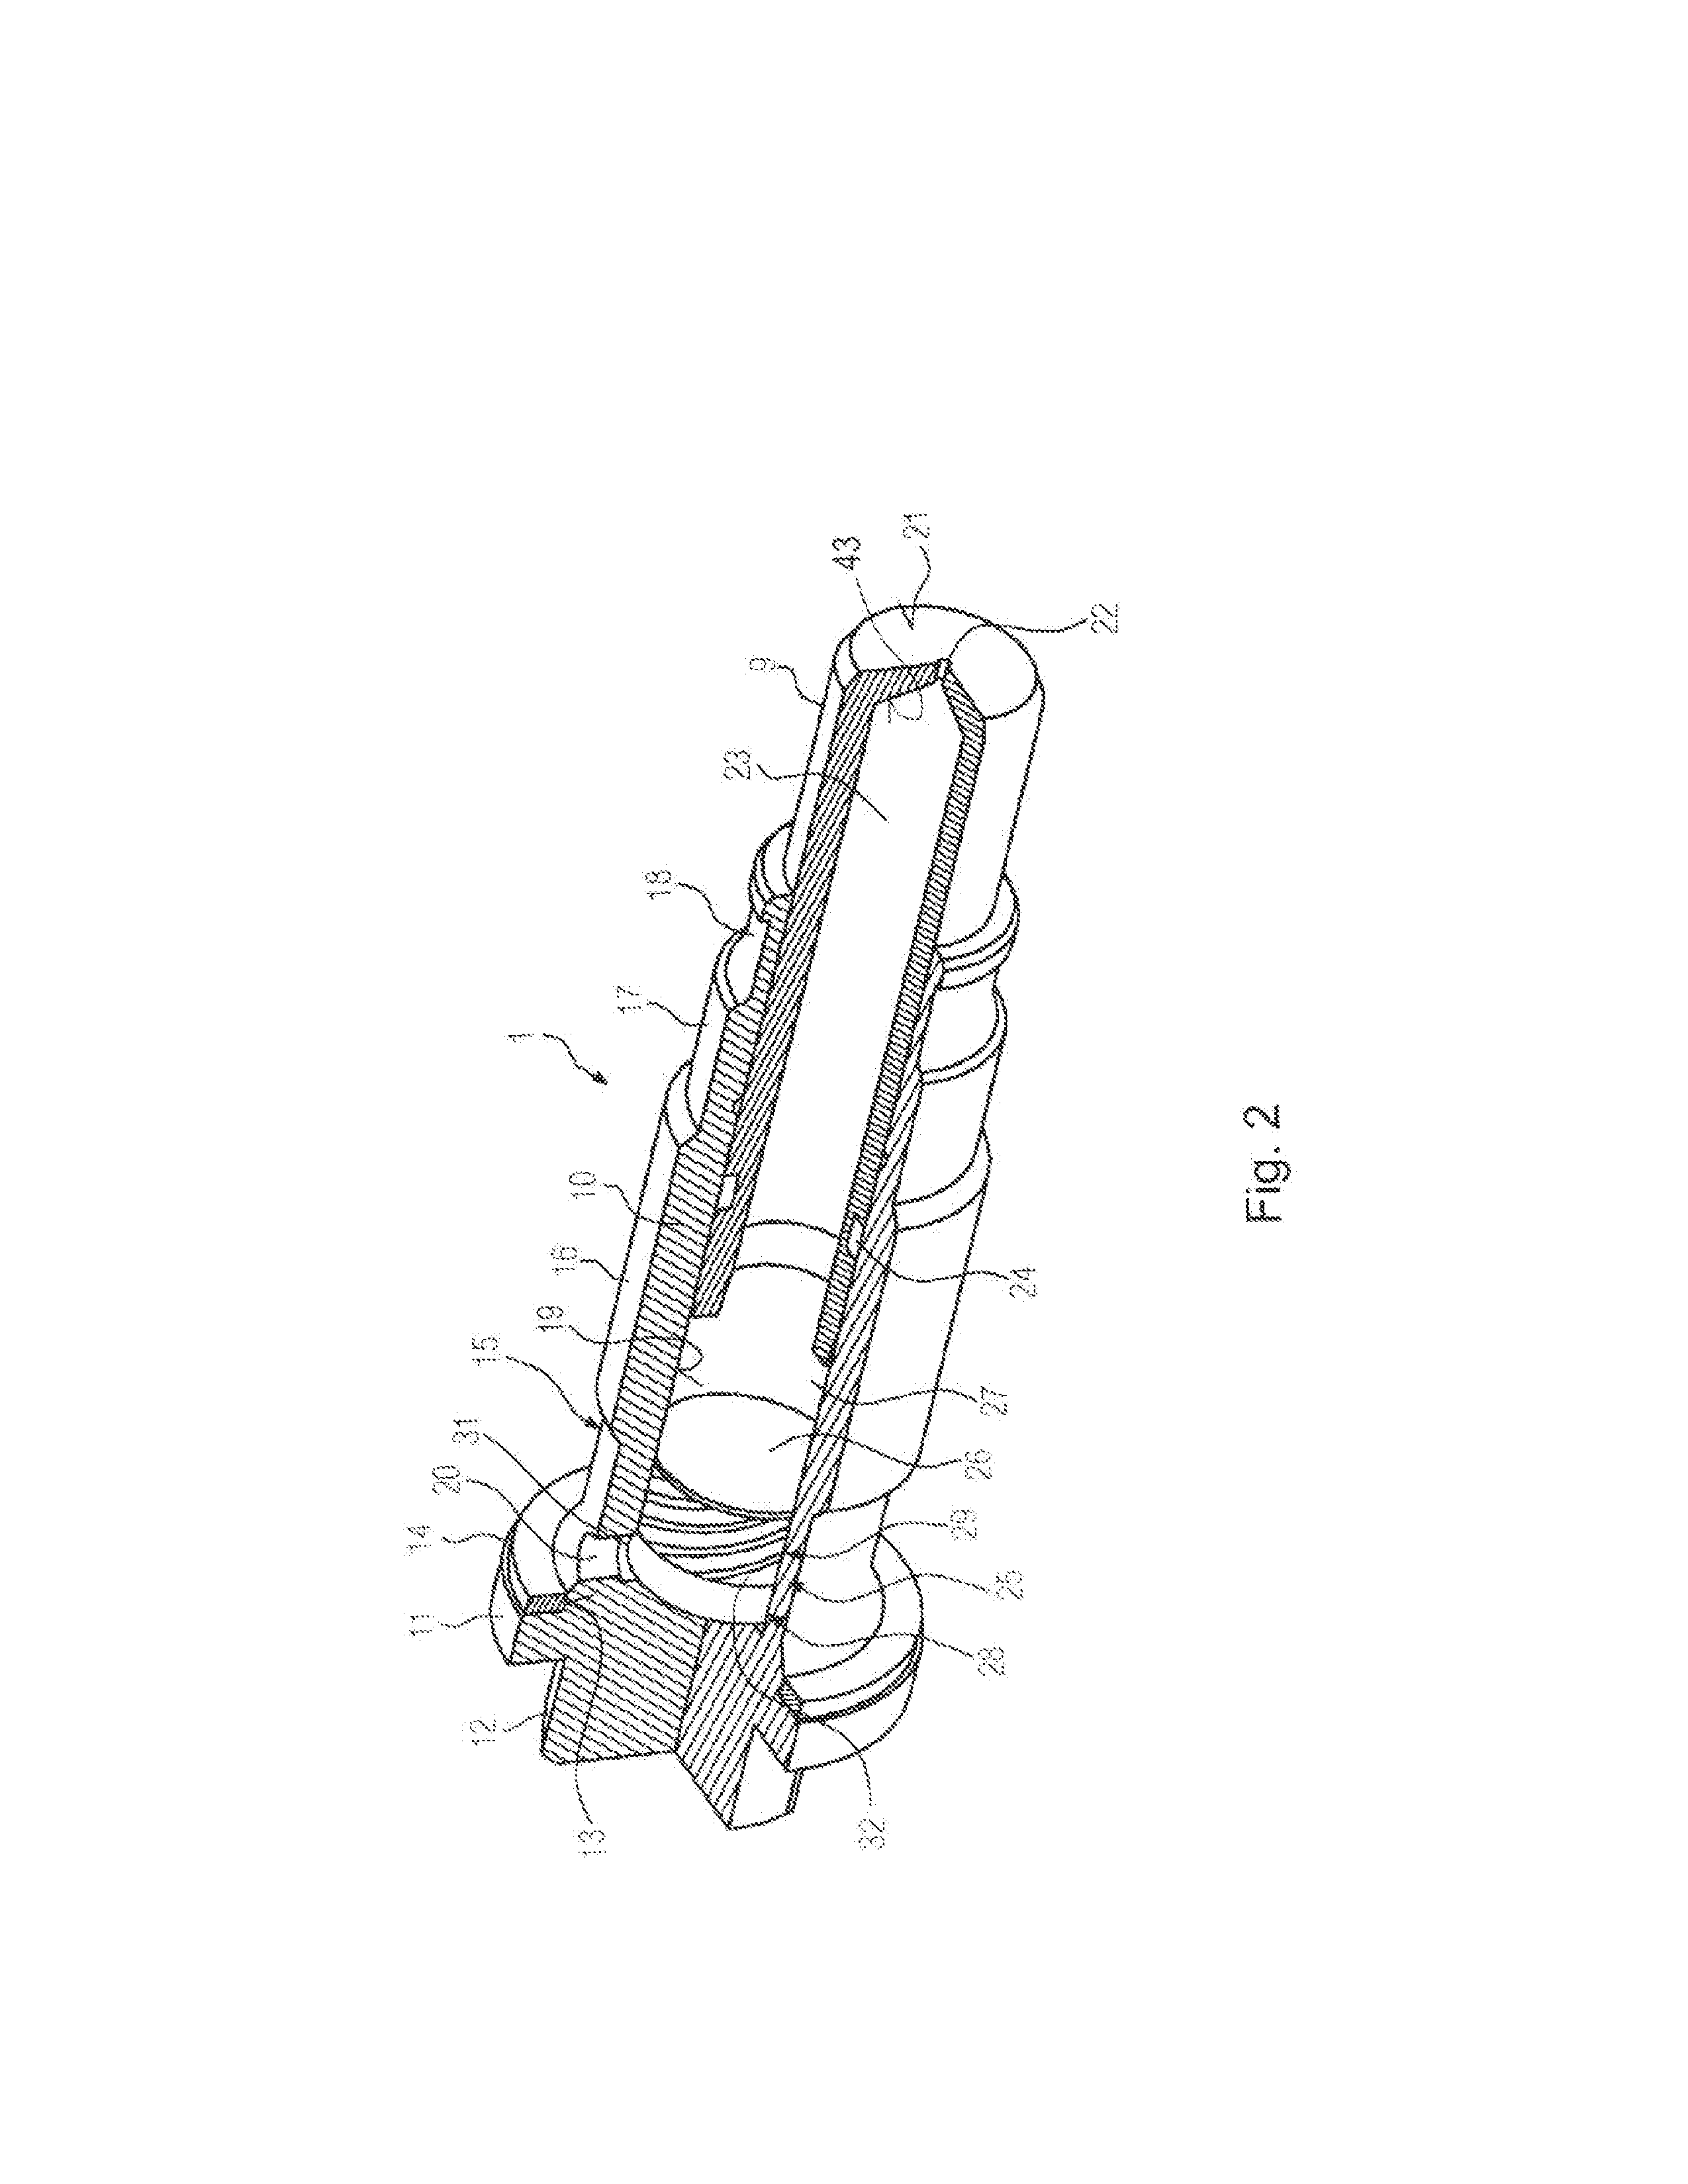 Tensioning Device with Damping Channel in the Fluid Supply System